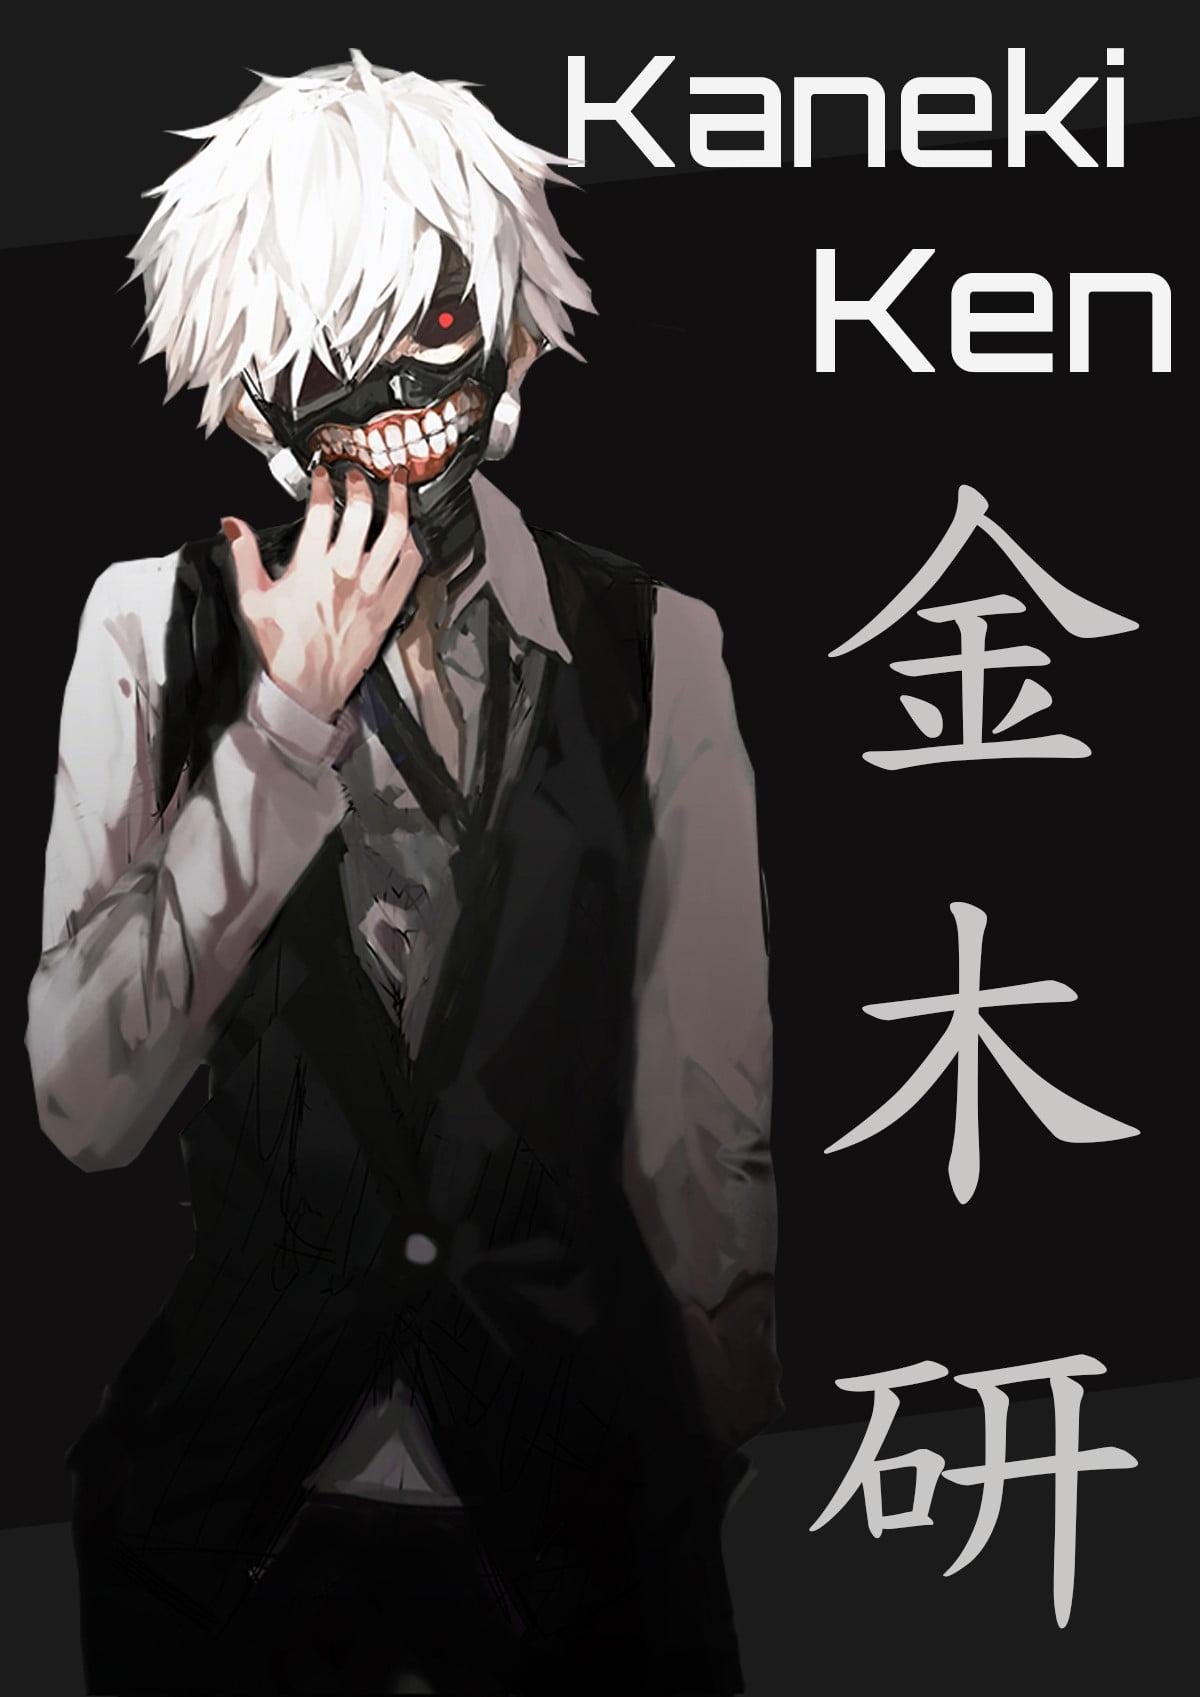 Tokyo Ghoul illustration HD wallpapers